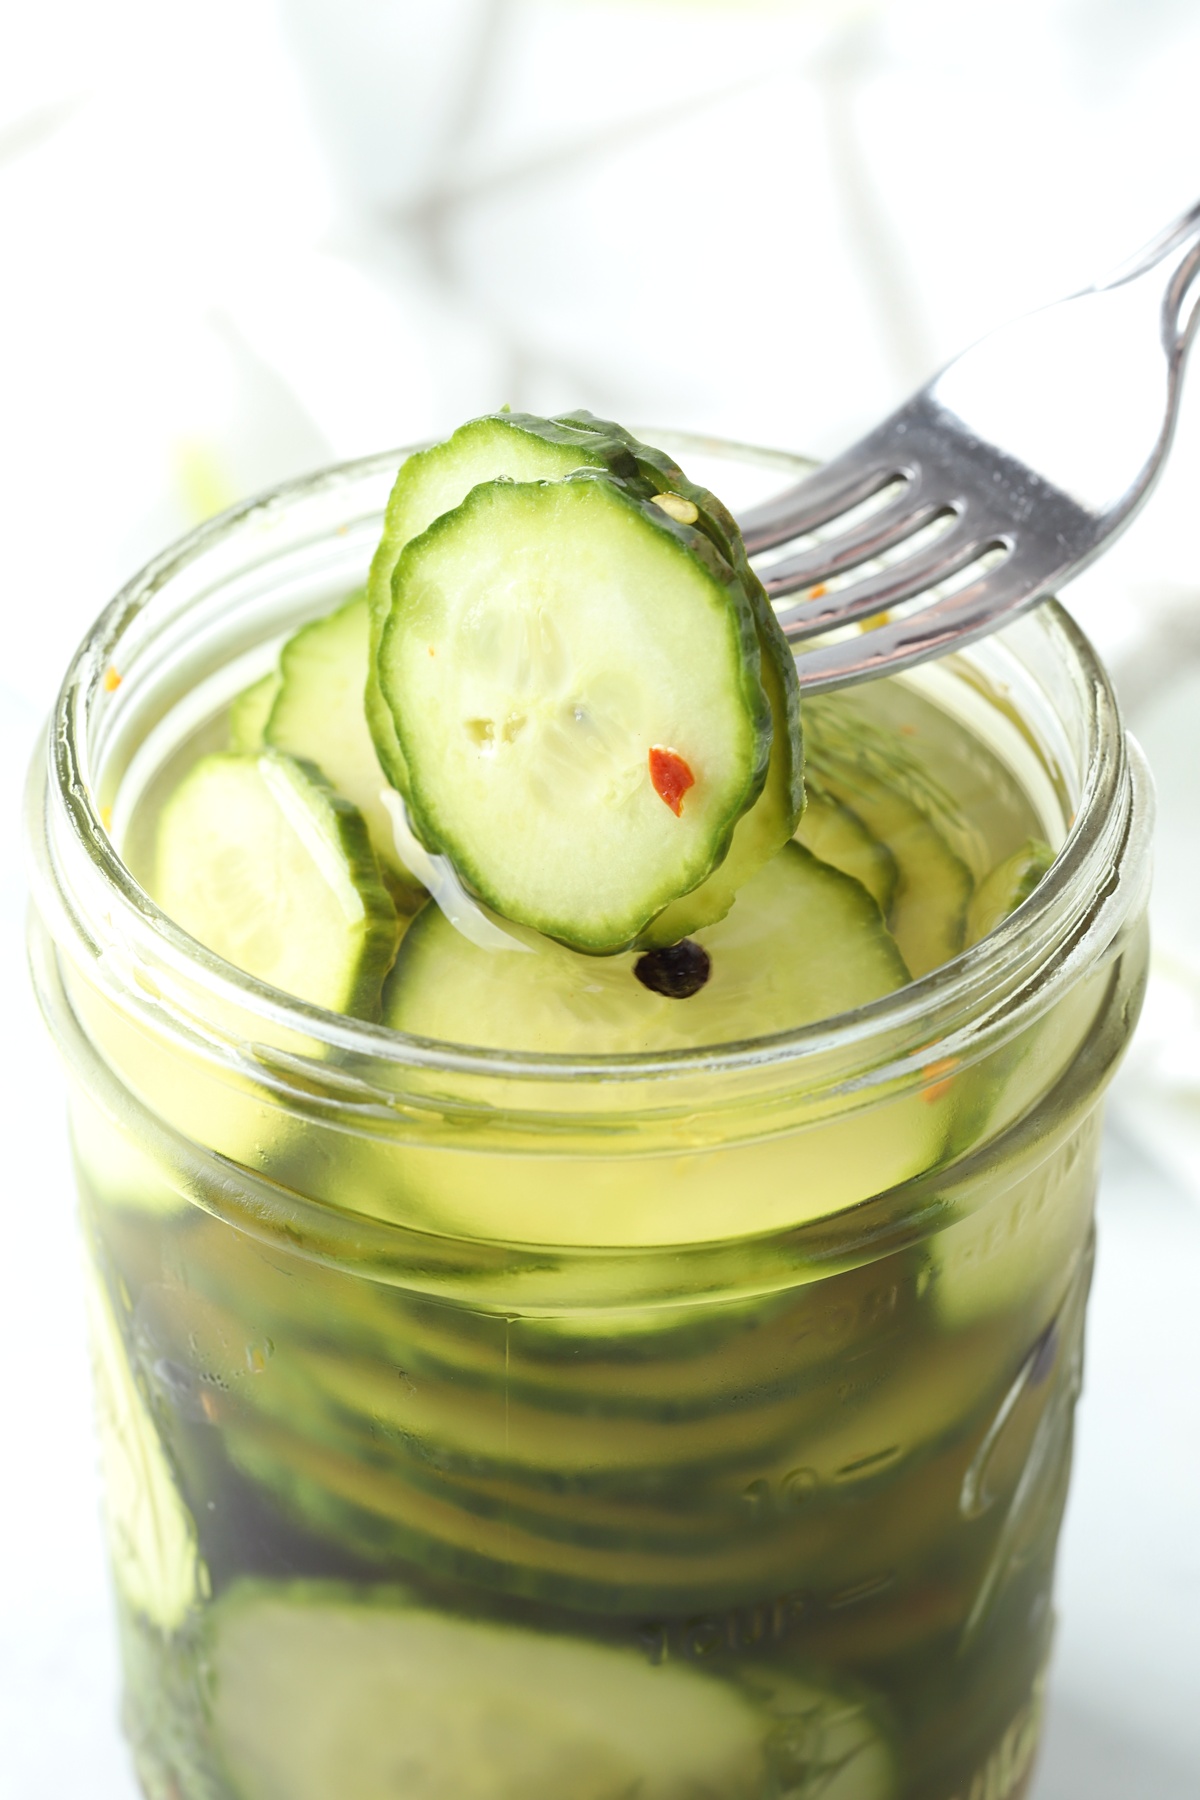 A fork piercing into pickles in a jar.